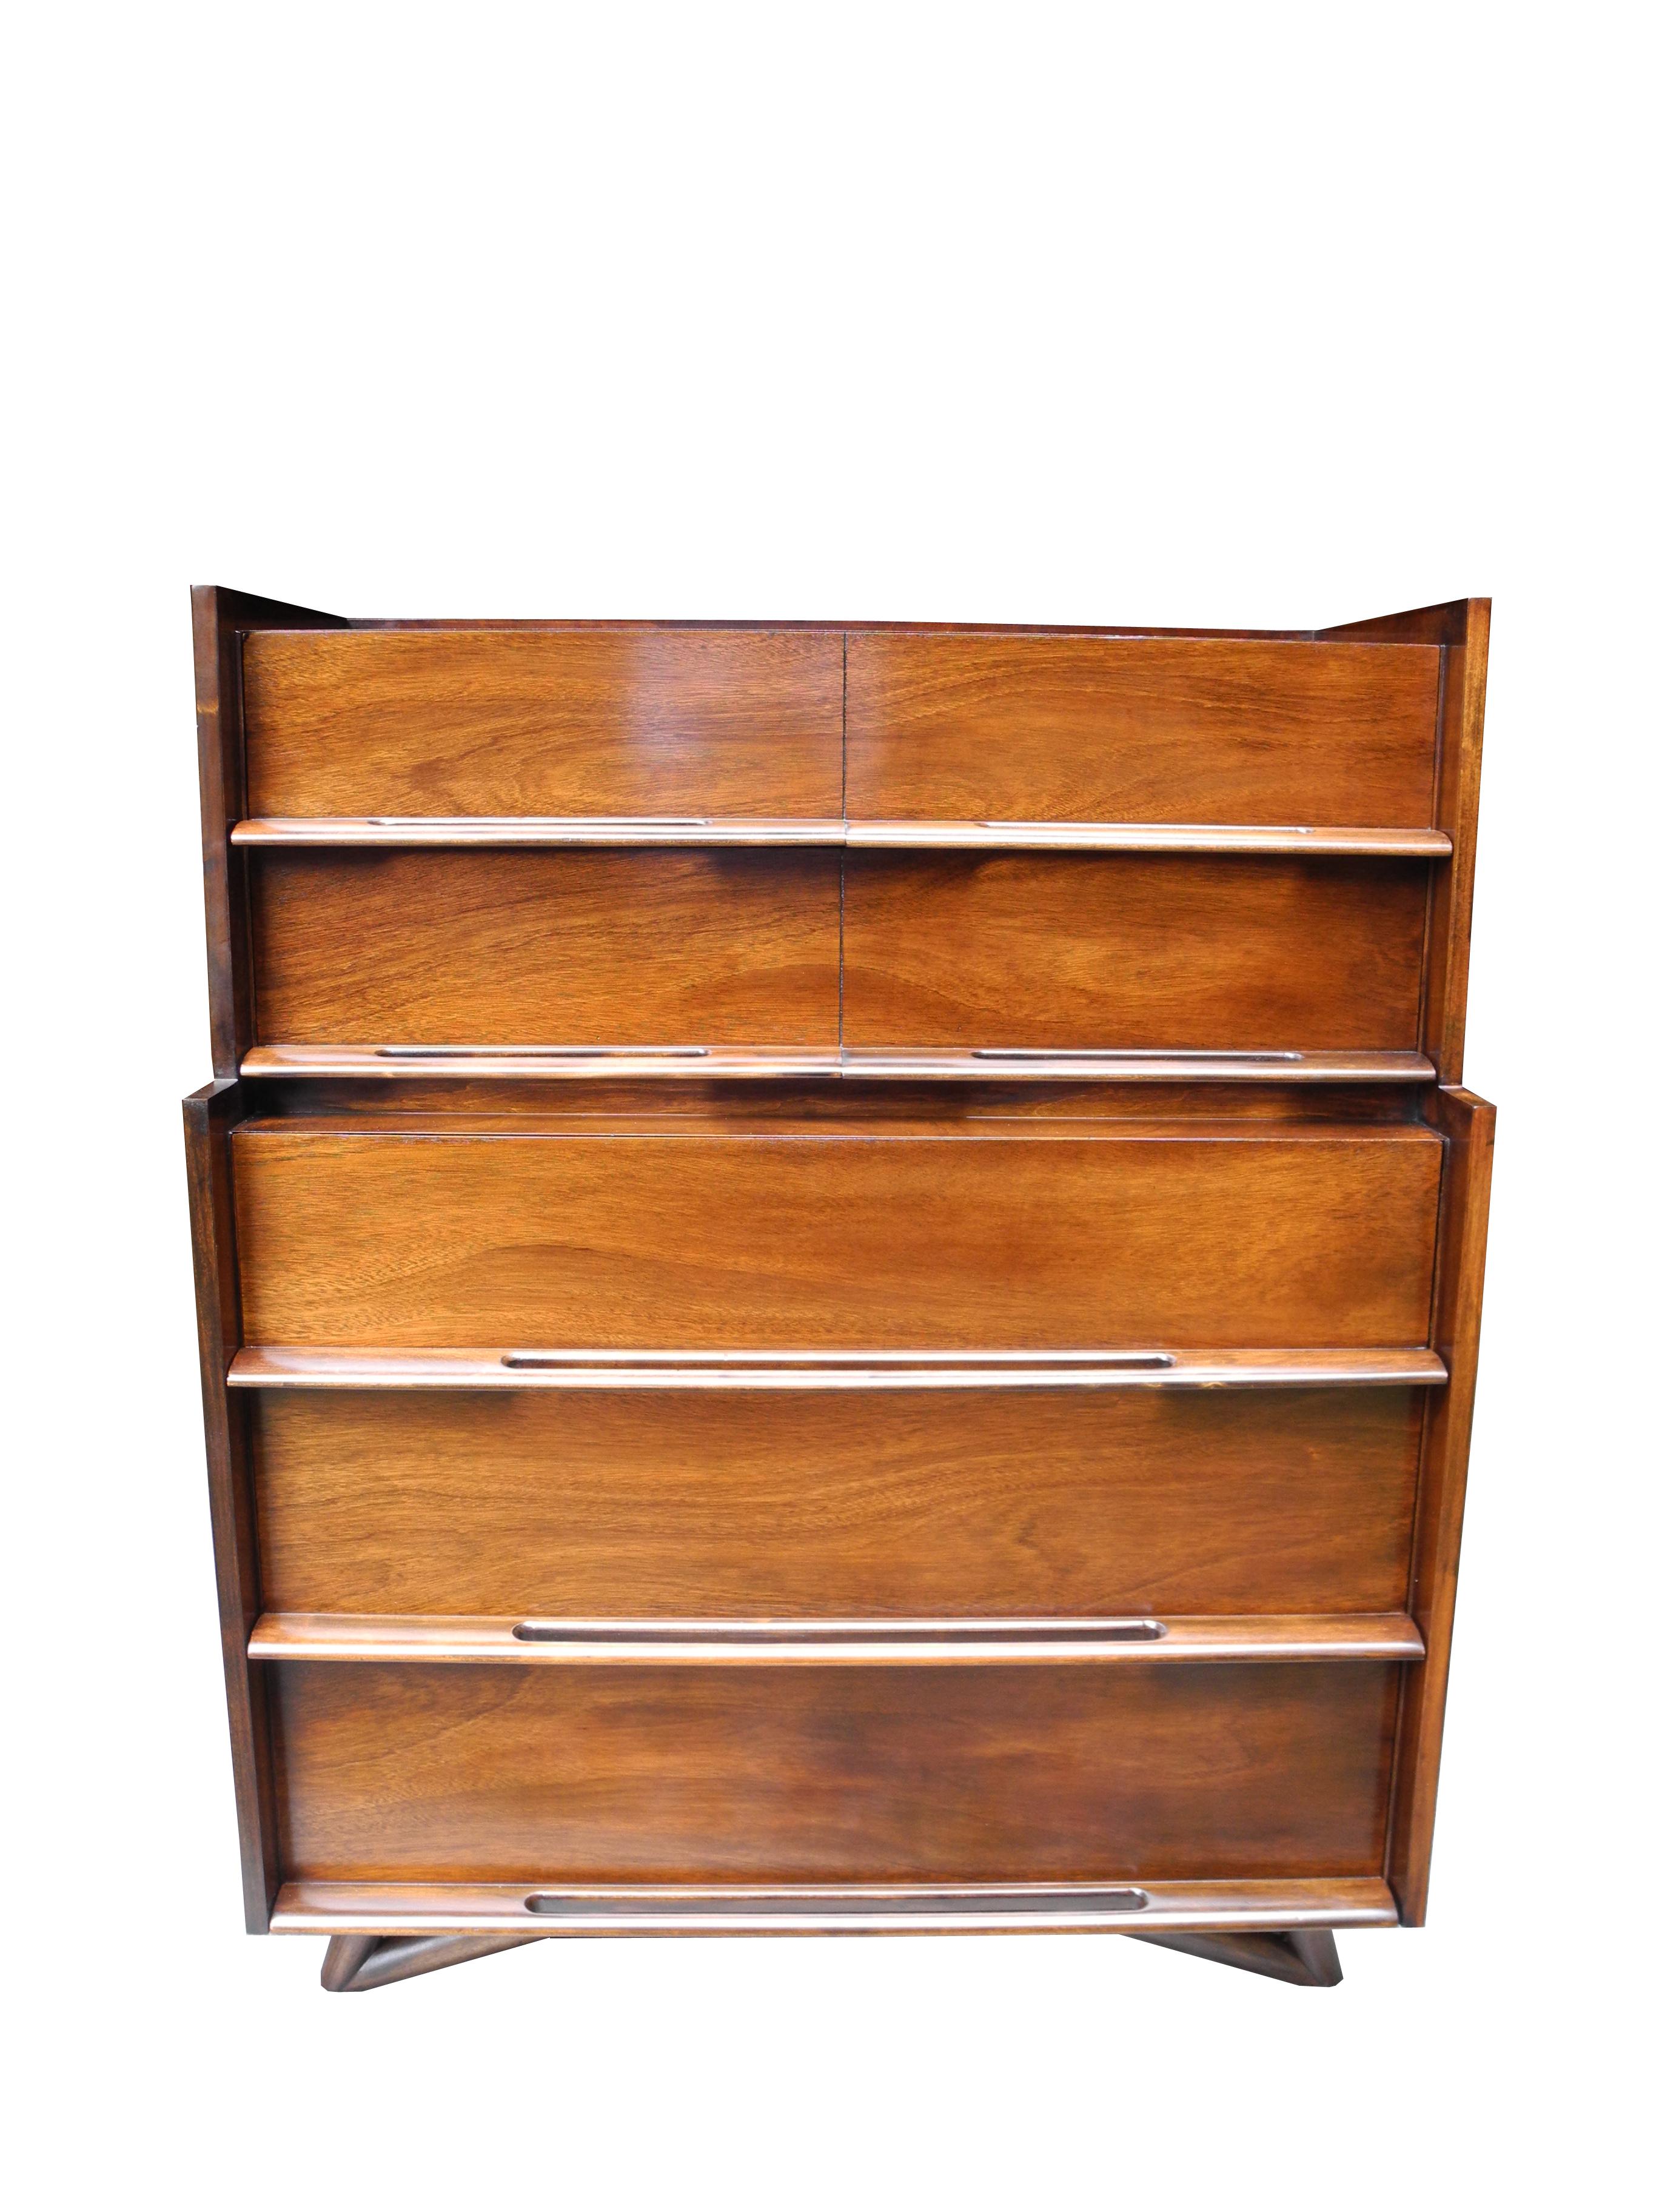 This Mid-Century Modern highboy dresser is made of cherry and is stained in dark walnut.
Equipped with five drawers there is plenty of practical storage. The handles are classic Spence design. The lip on top is perfect for containing.